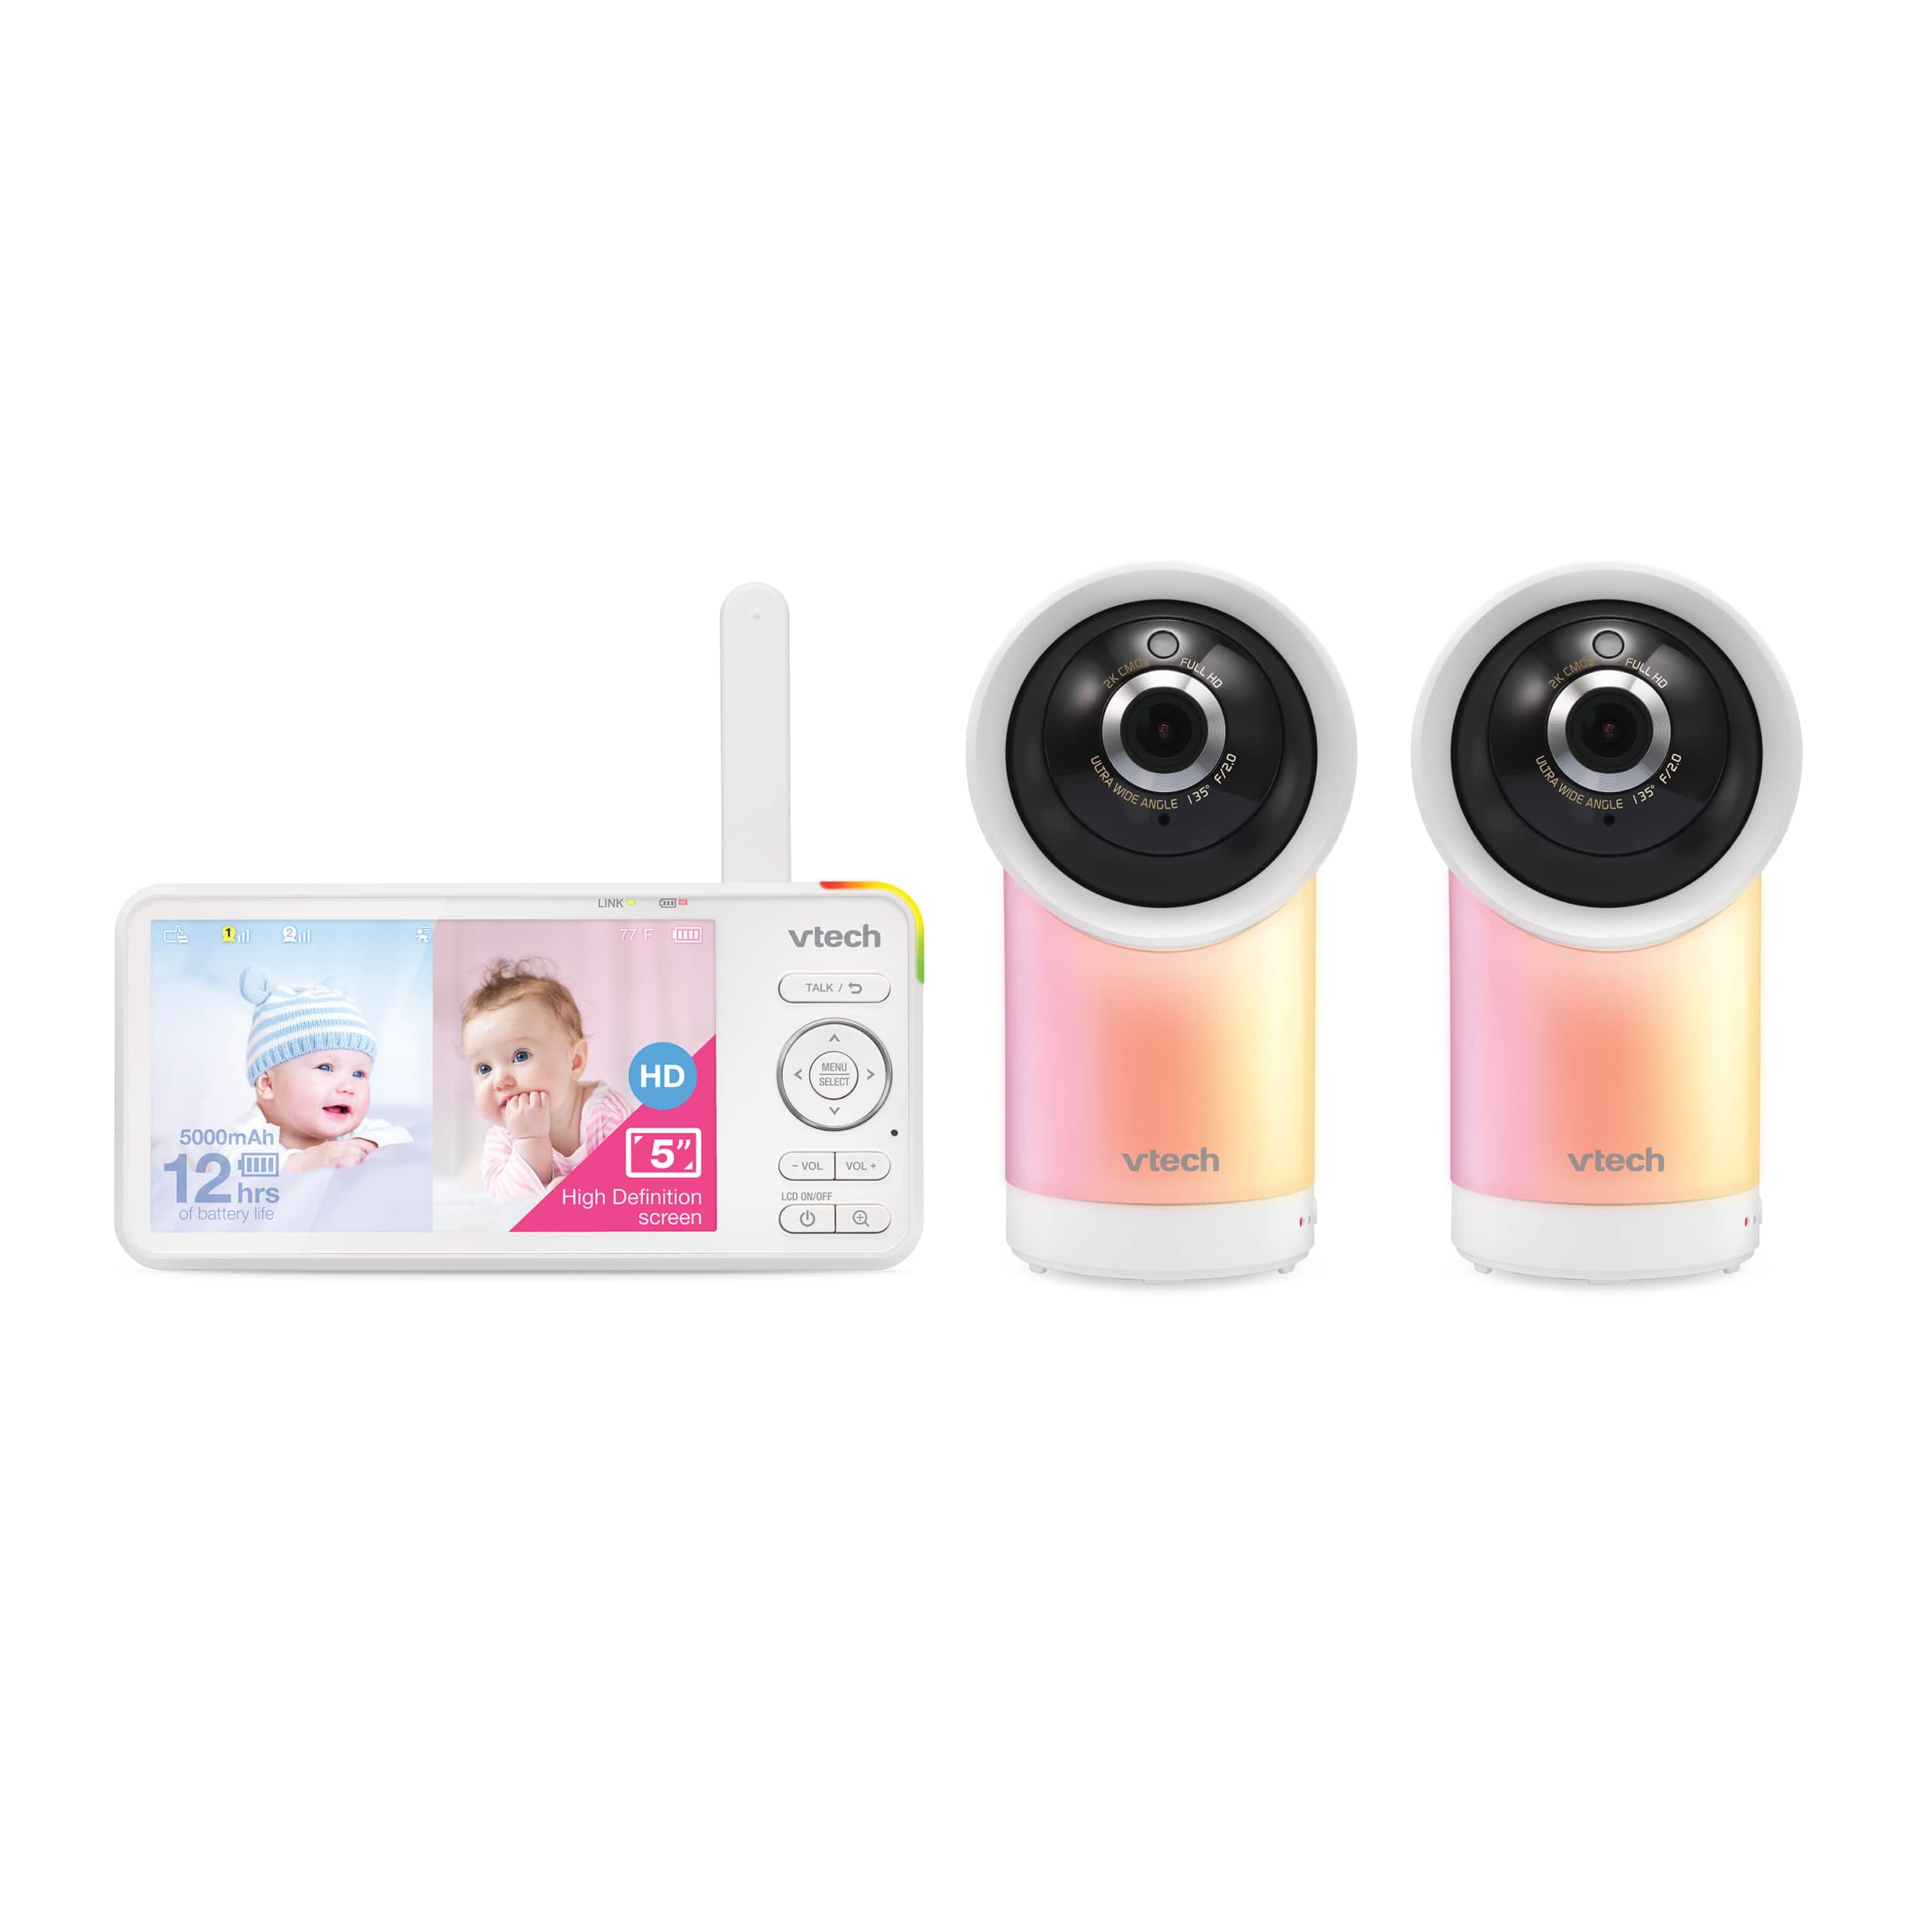 2 Camera 1080p Smart WiFi Remote Access 360 Degree Pan & Tilt Video Baby Monitor with 5